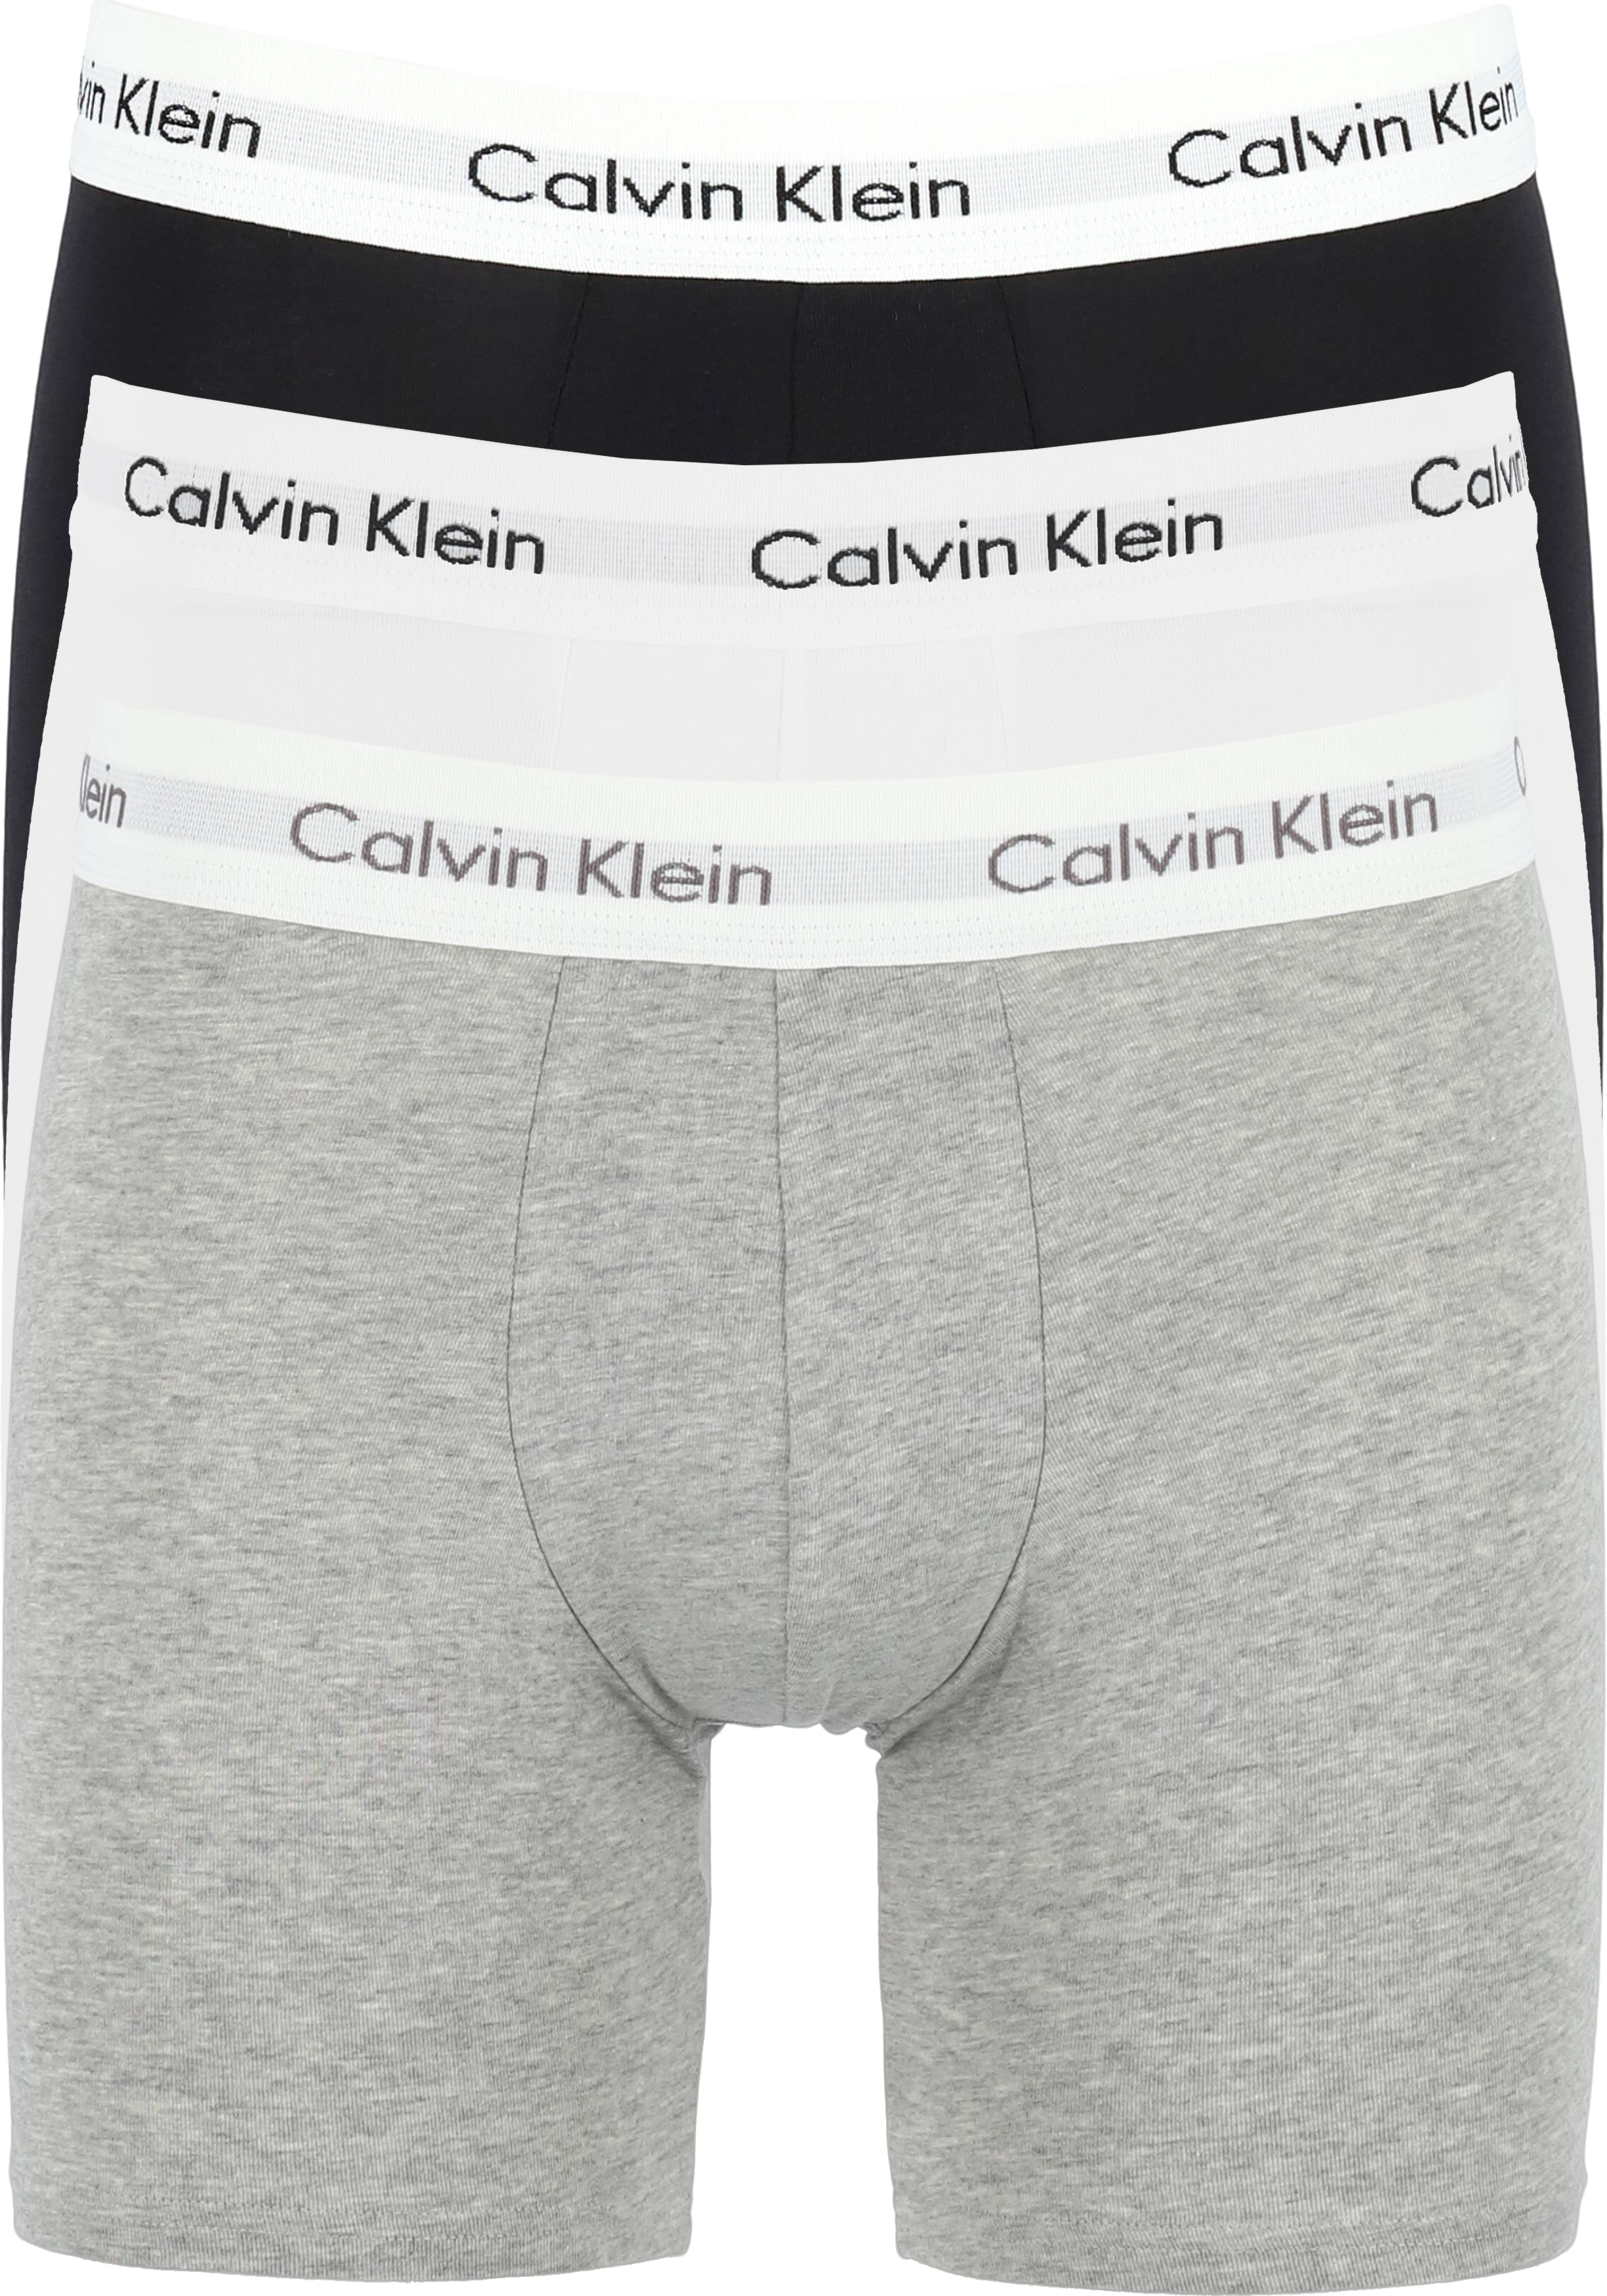 Klein Cotton Stretch boxer brief (3-pack), boxers extra... - Zomer SALE tot 50% korting